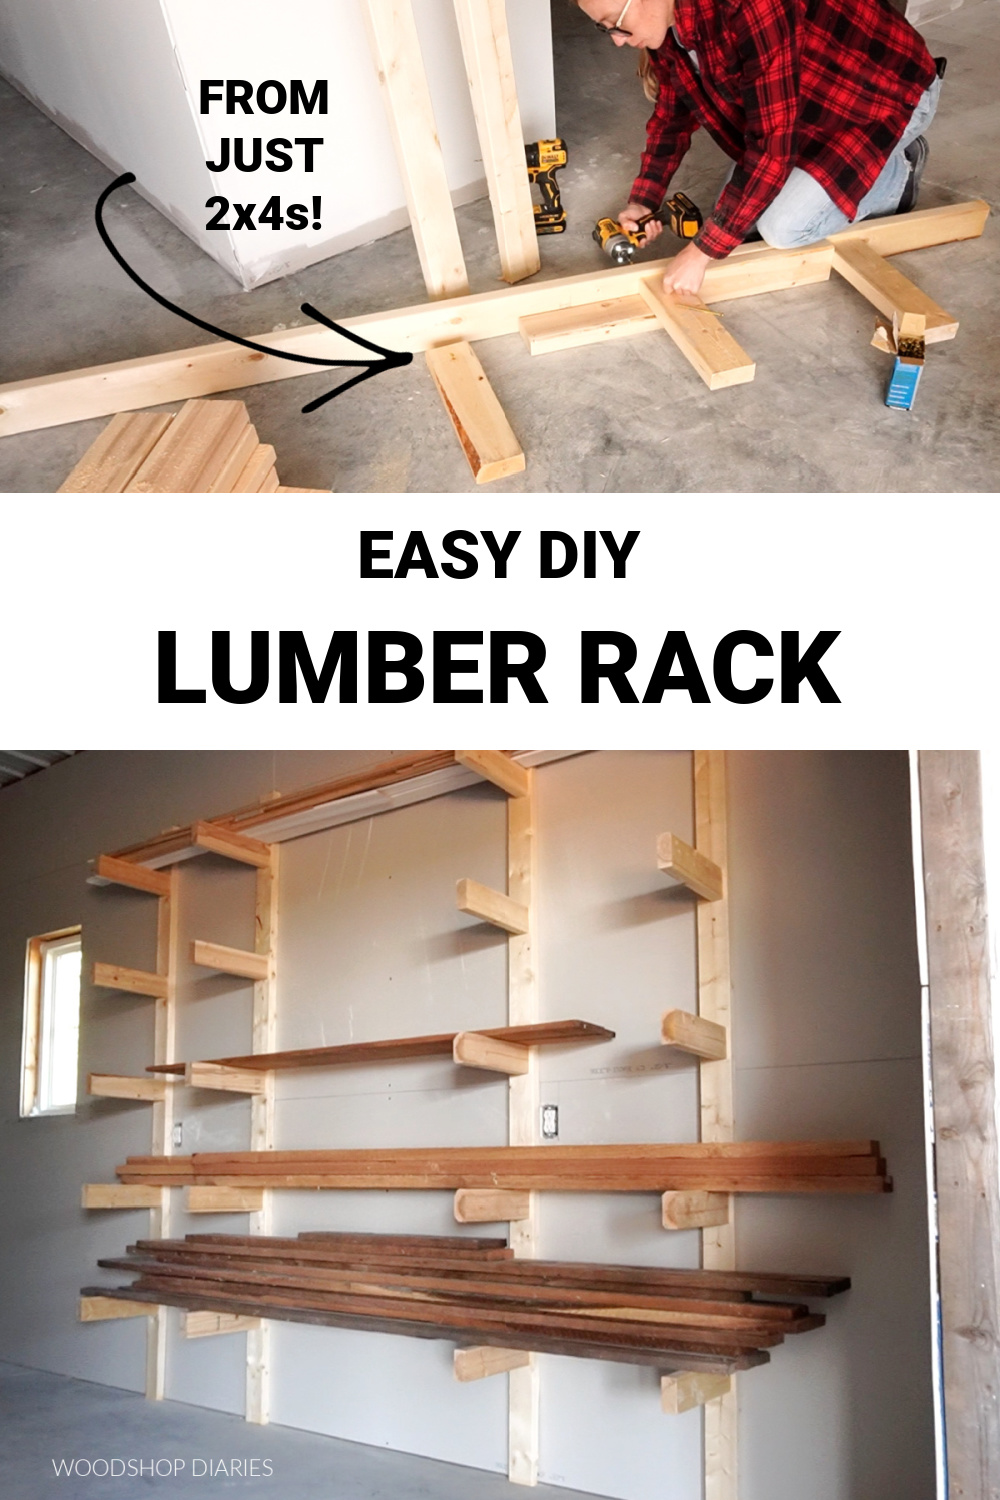 Pinterest collage image showing Shara securing rungs to backer board at top and completed lumber rack on wall at bottom with text "EASY DIY LUMBER RACK"